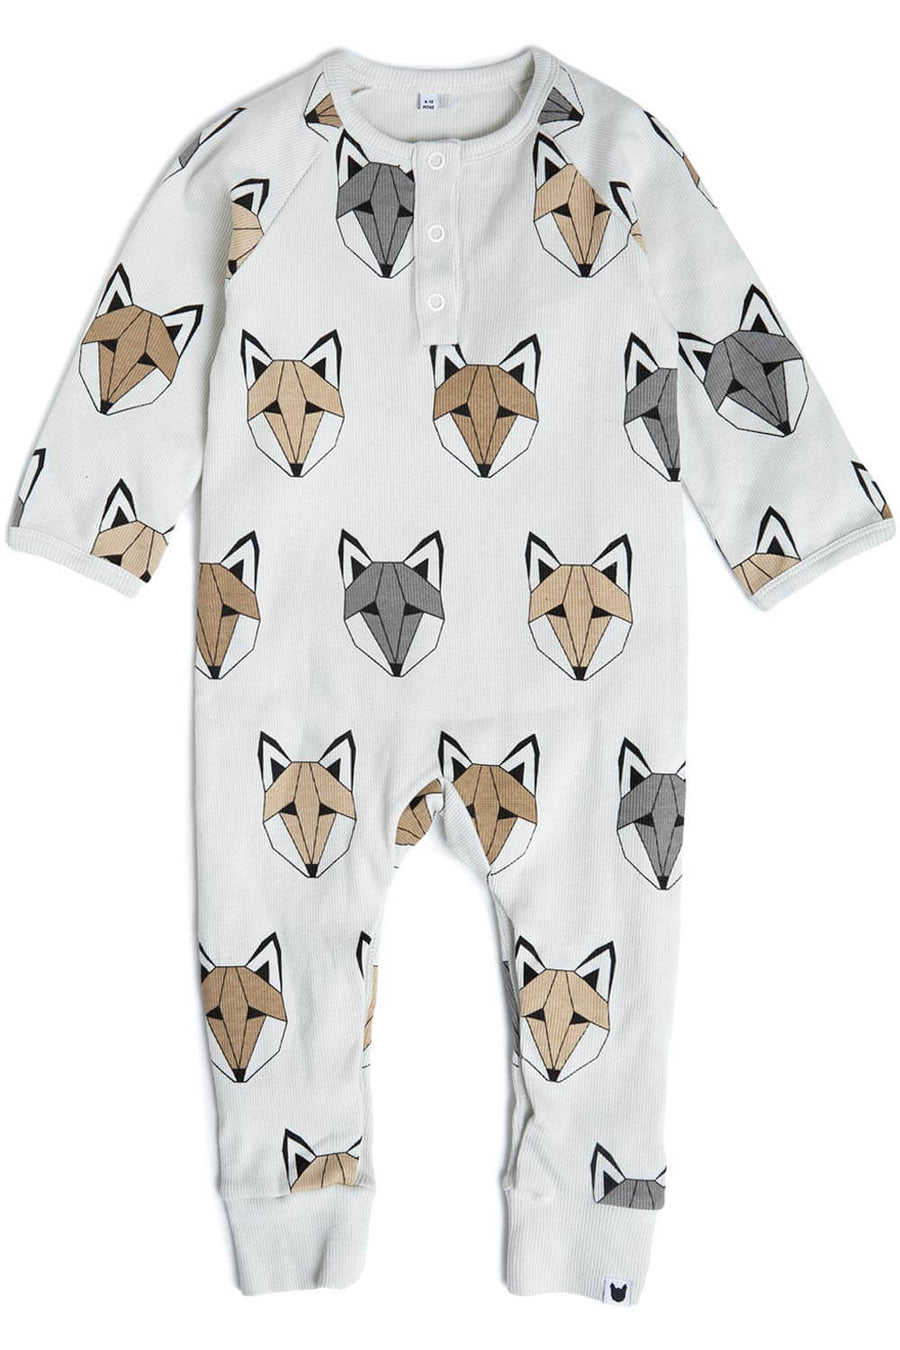 Neutral/beige baby romper/all-in-one, fox print, organic ribbed cotton, 0-2 years | Tobias & the Bear, organic, eco-friendly, unisex baby & kidswear